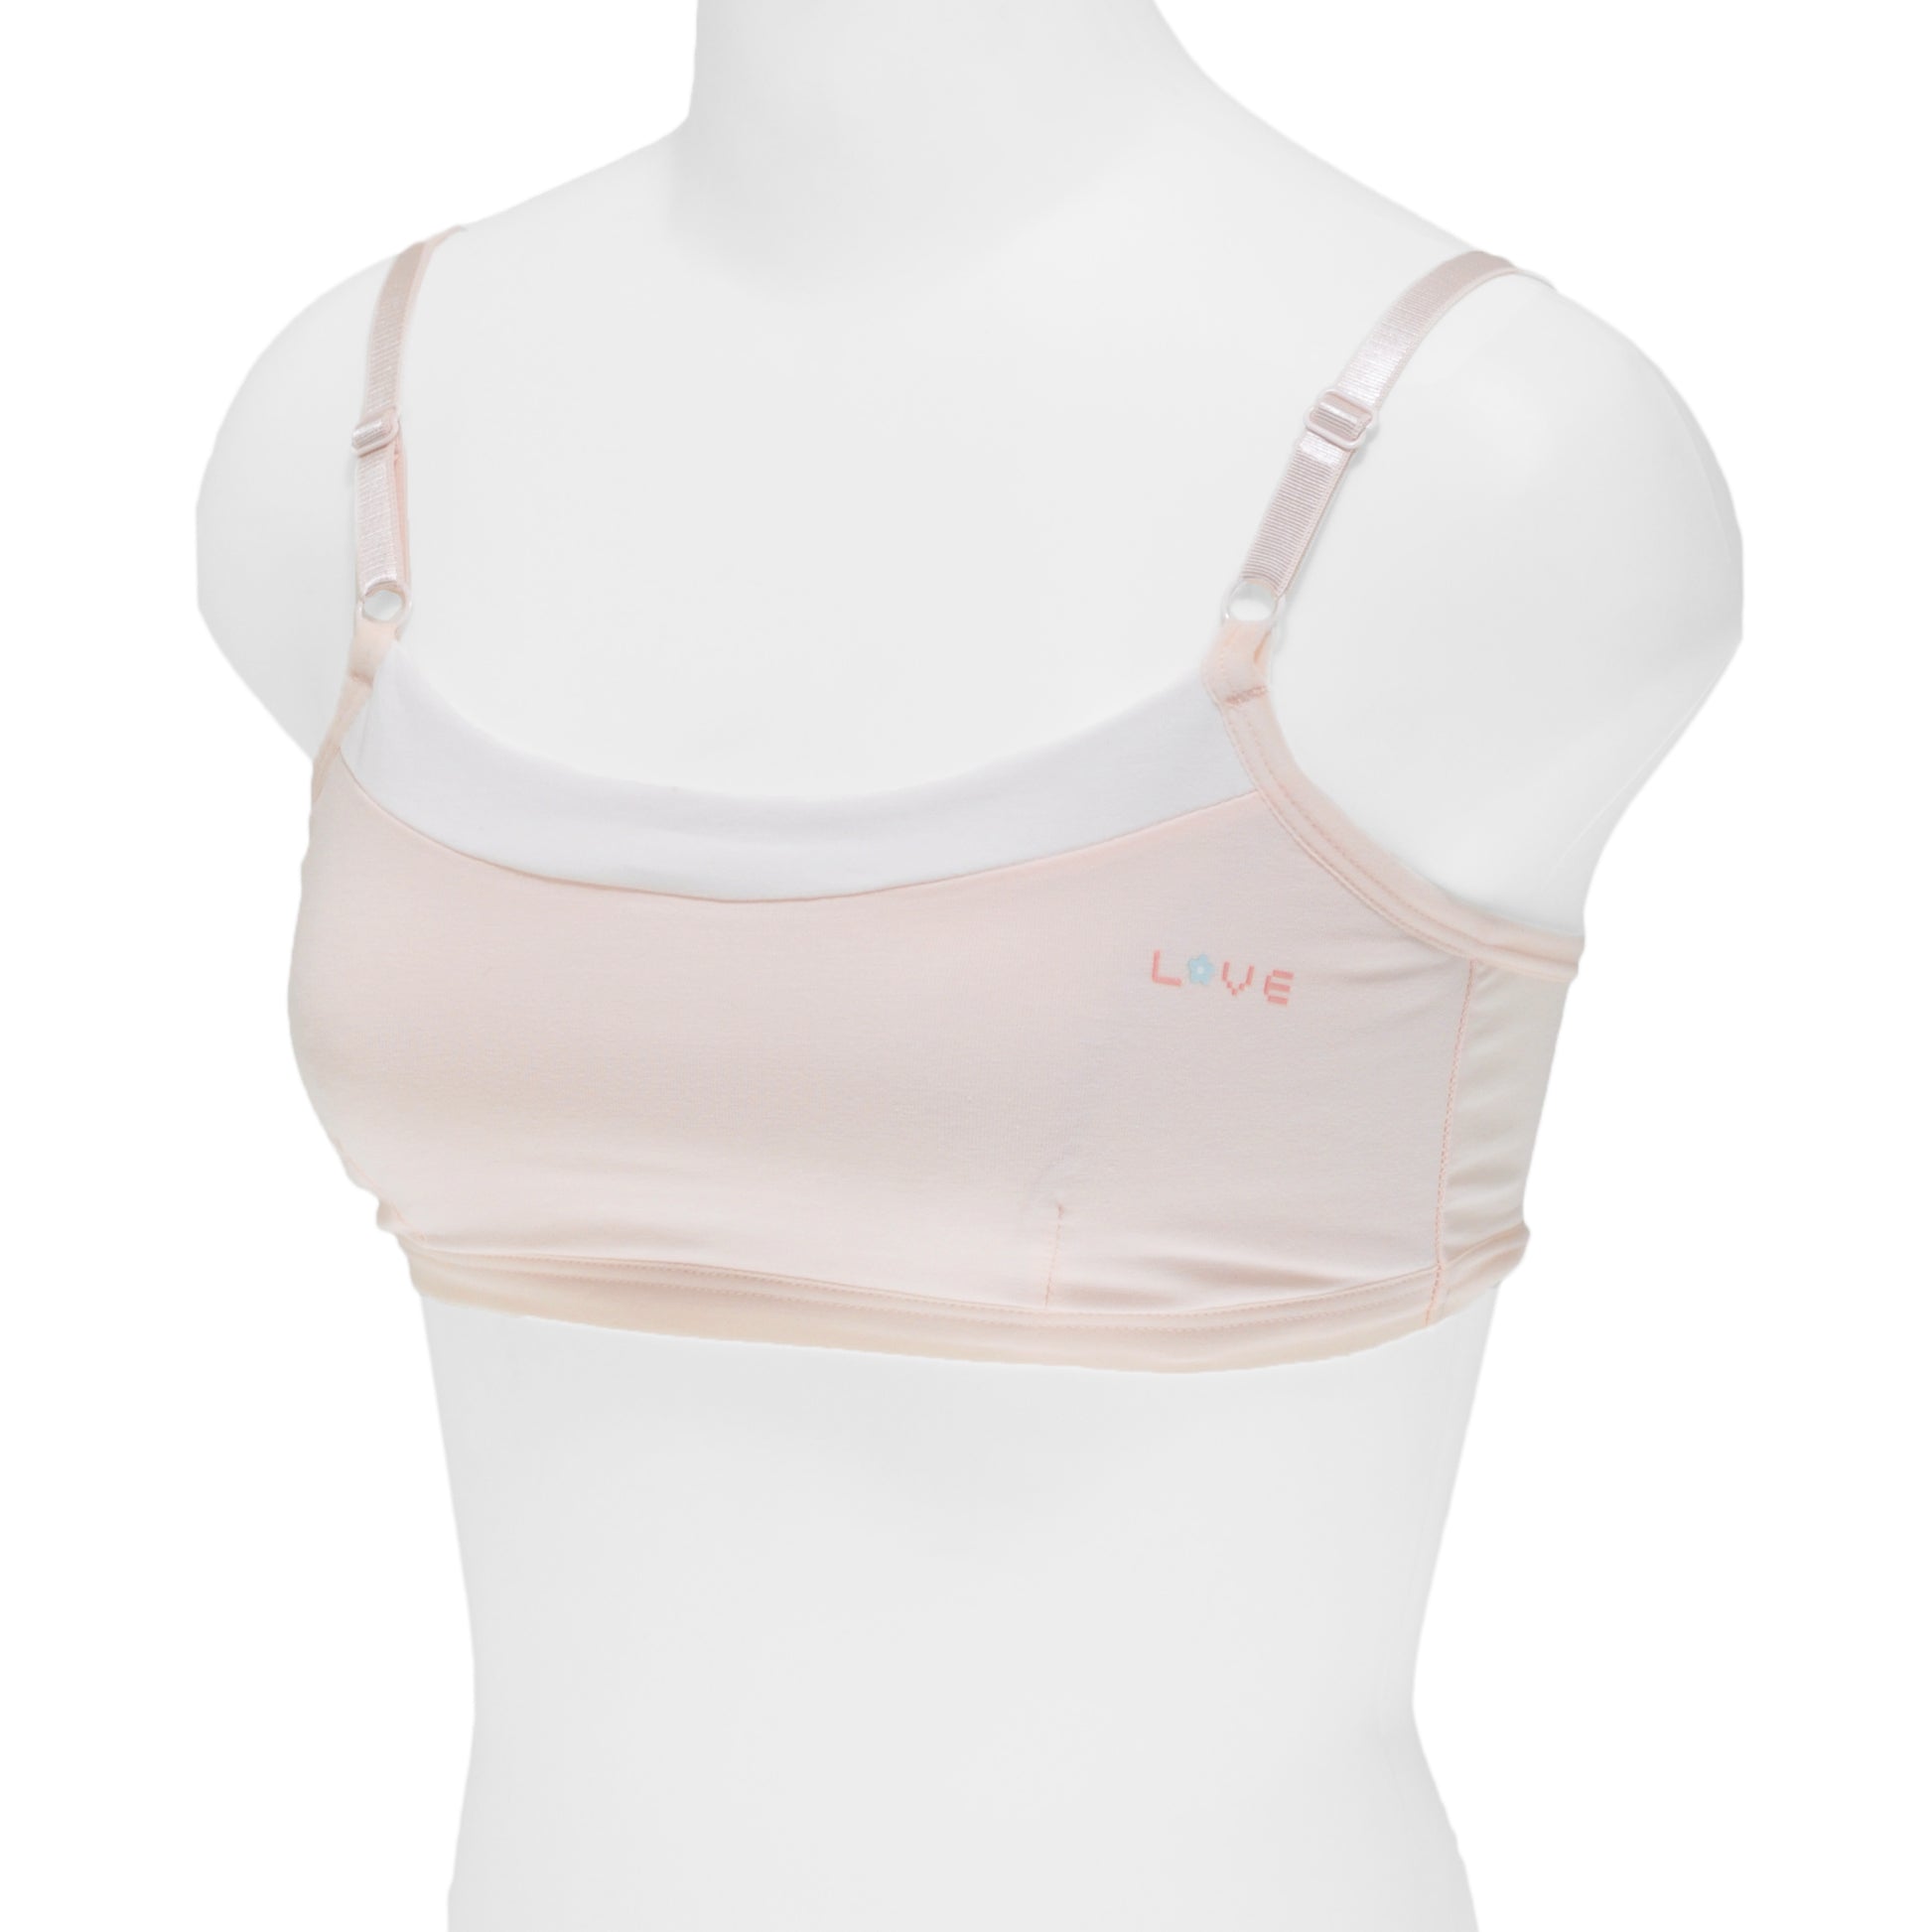 Angelina Girl's Wire-free Cotton Training Bra with Love Detail